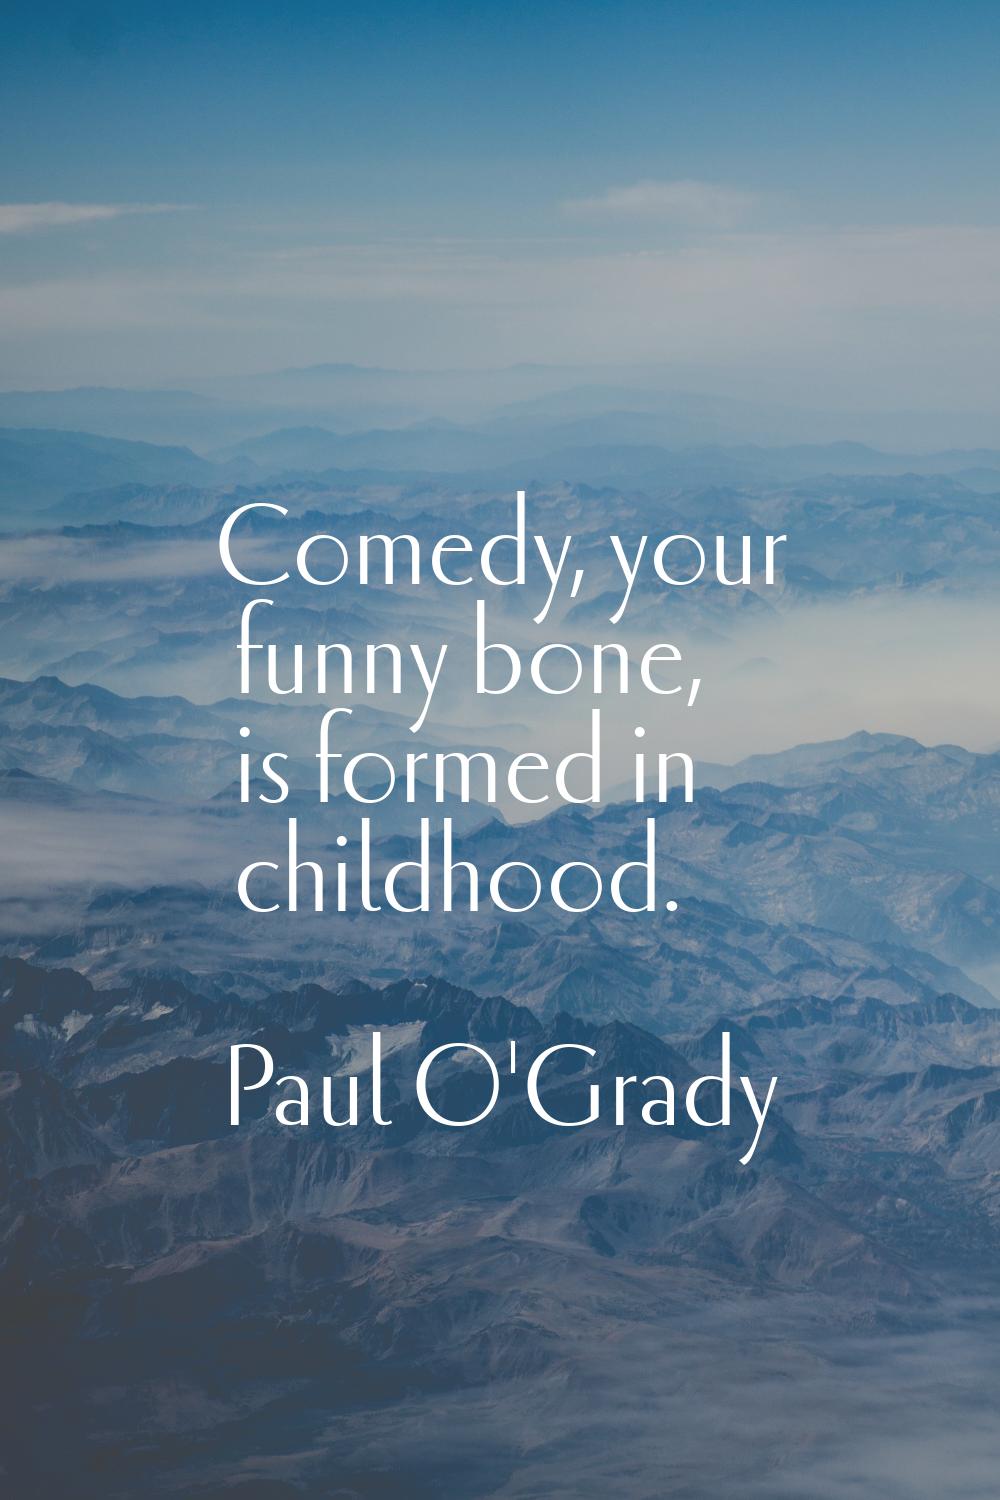 Comedy, your funny bone, is formed in childhood.